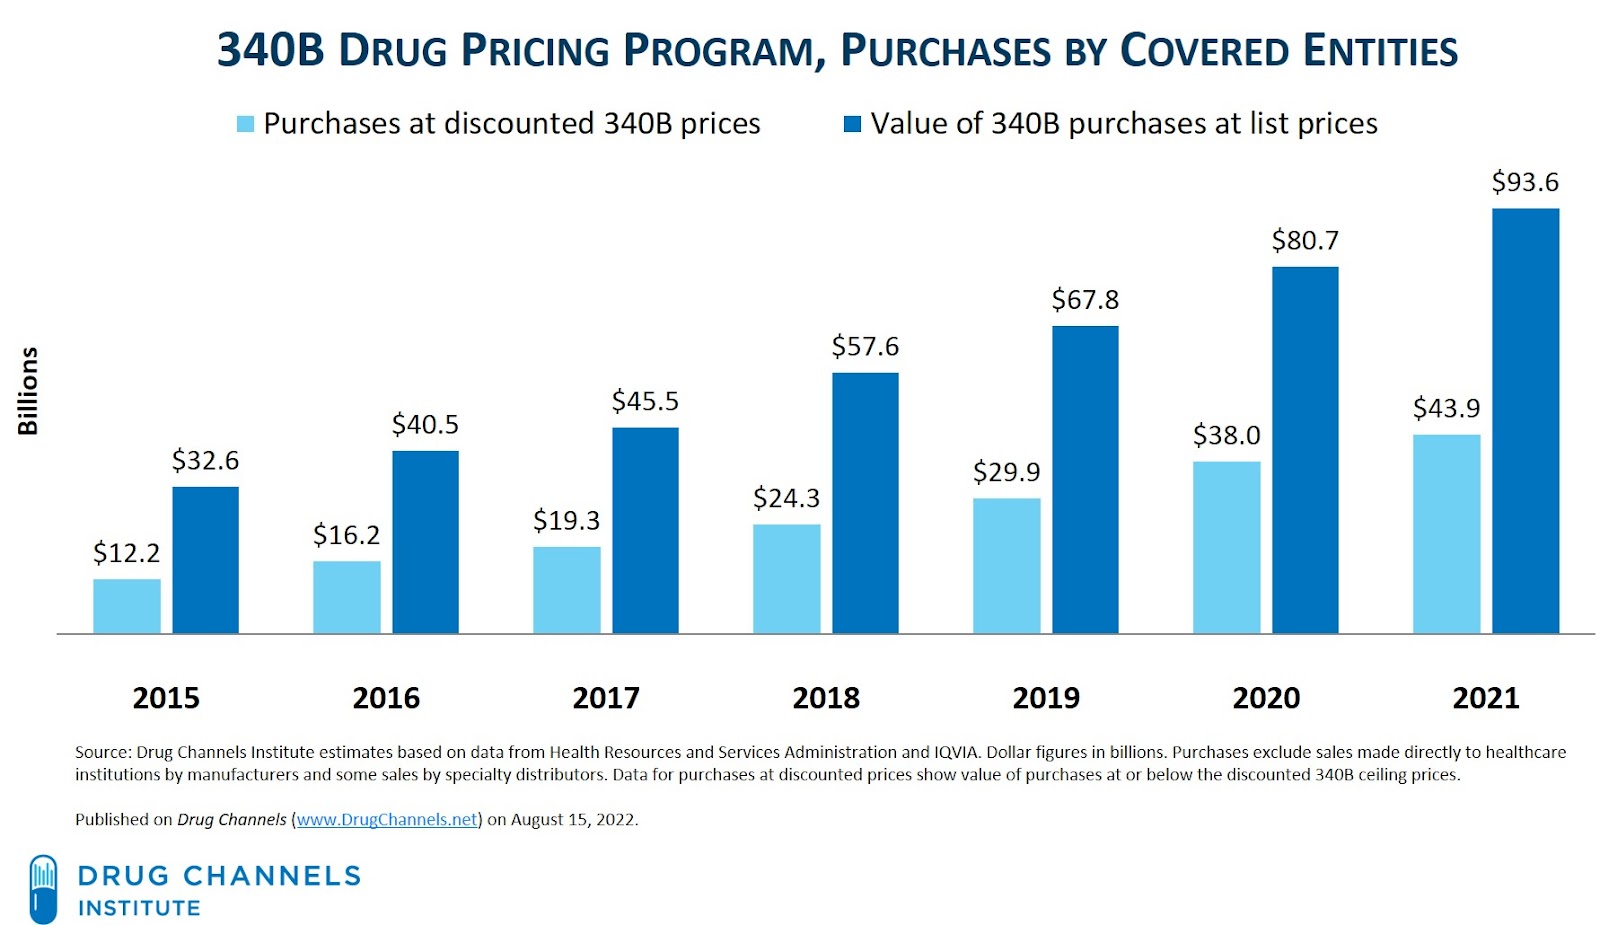 drug-channels-the-340b-program-climbed-to-44-billion-in-2021-with